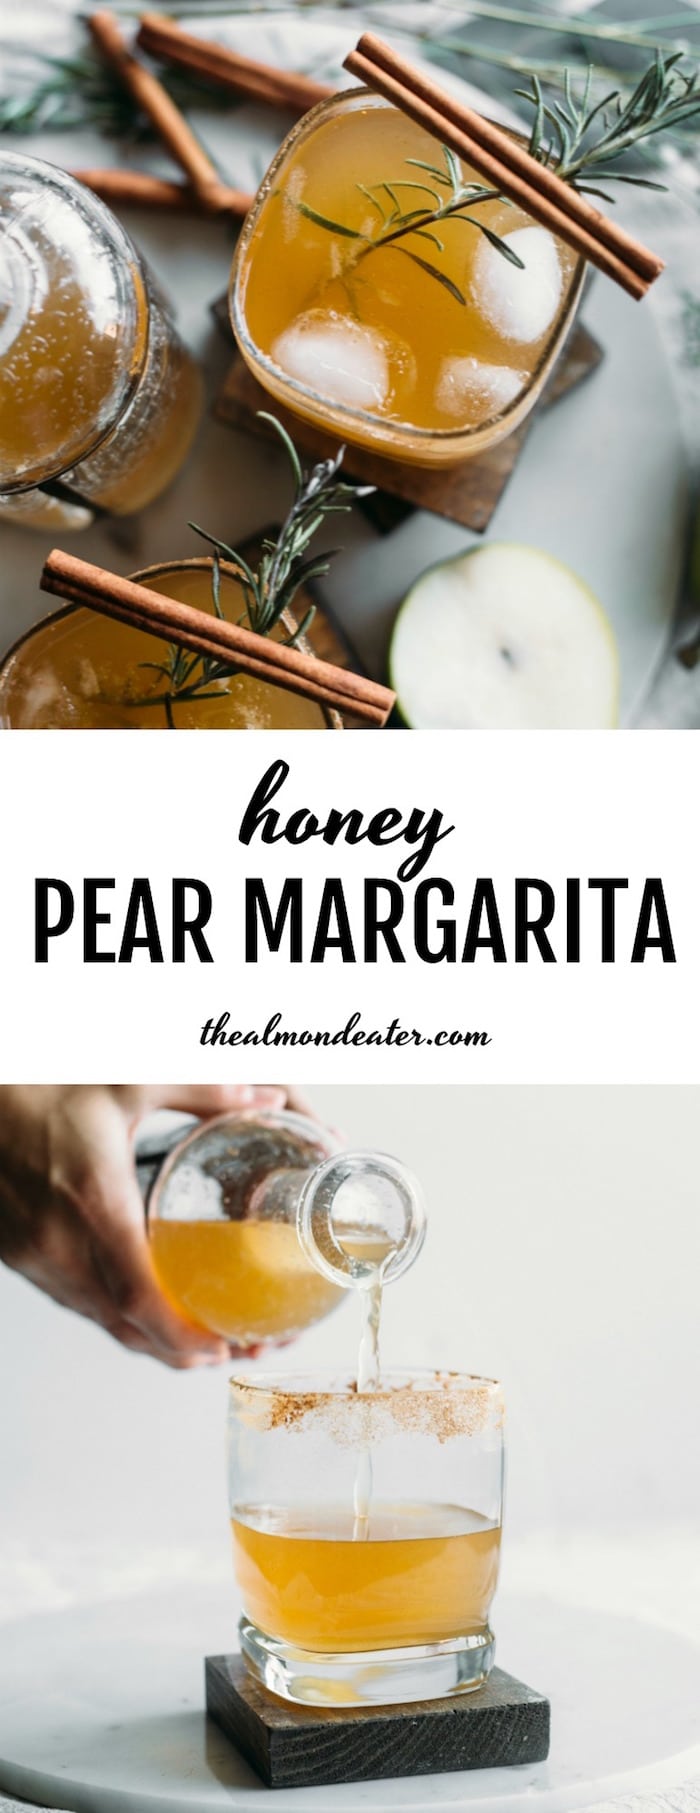 Honey Pear Margarita made with pear juice and plenty of tequila for a tasty fall-flavored cocktail | thealmondeater.com